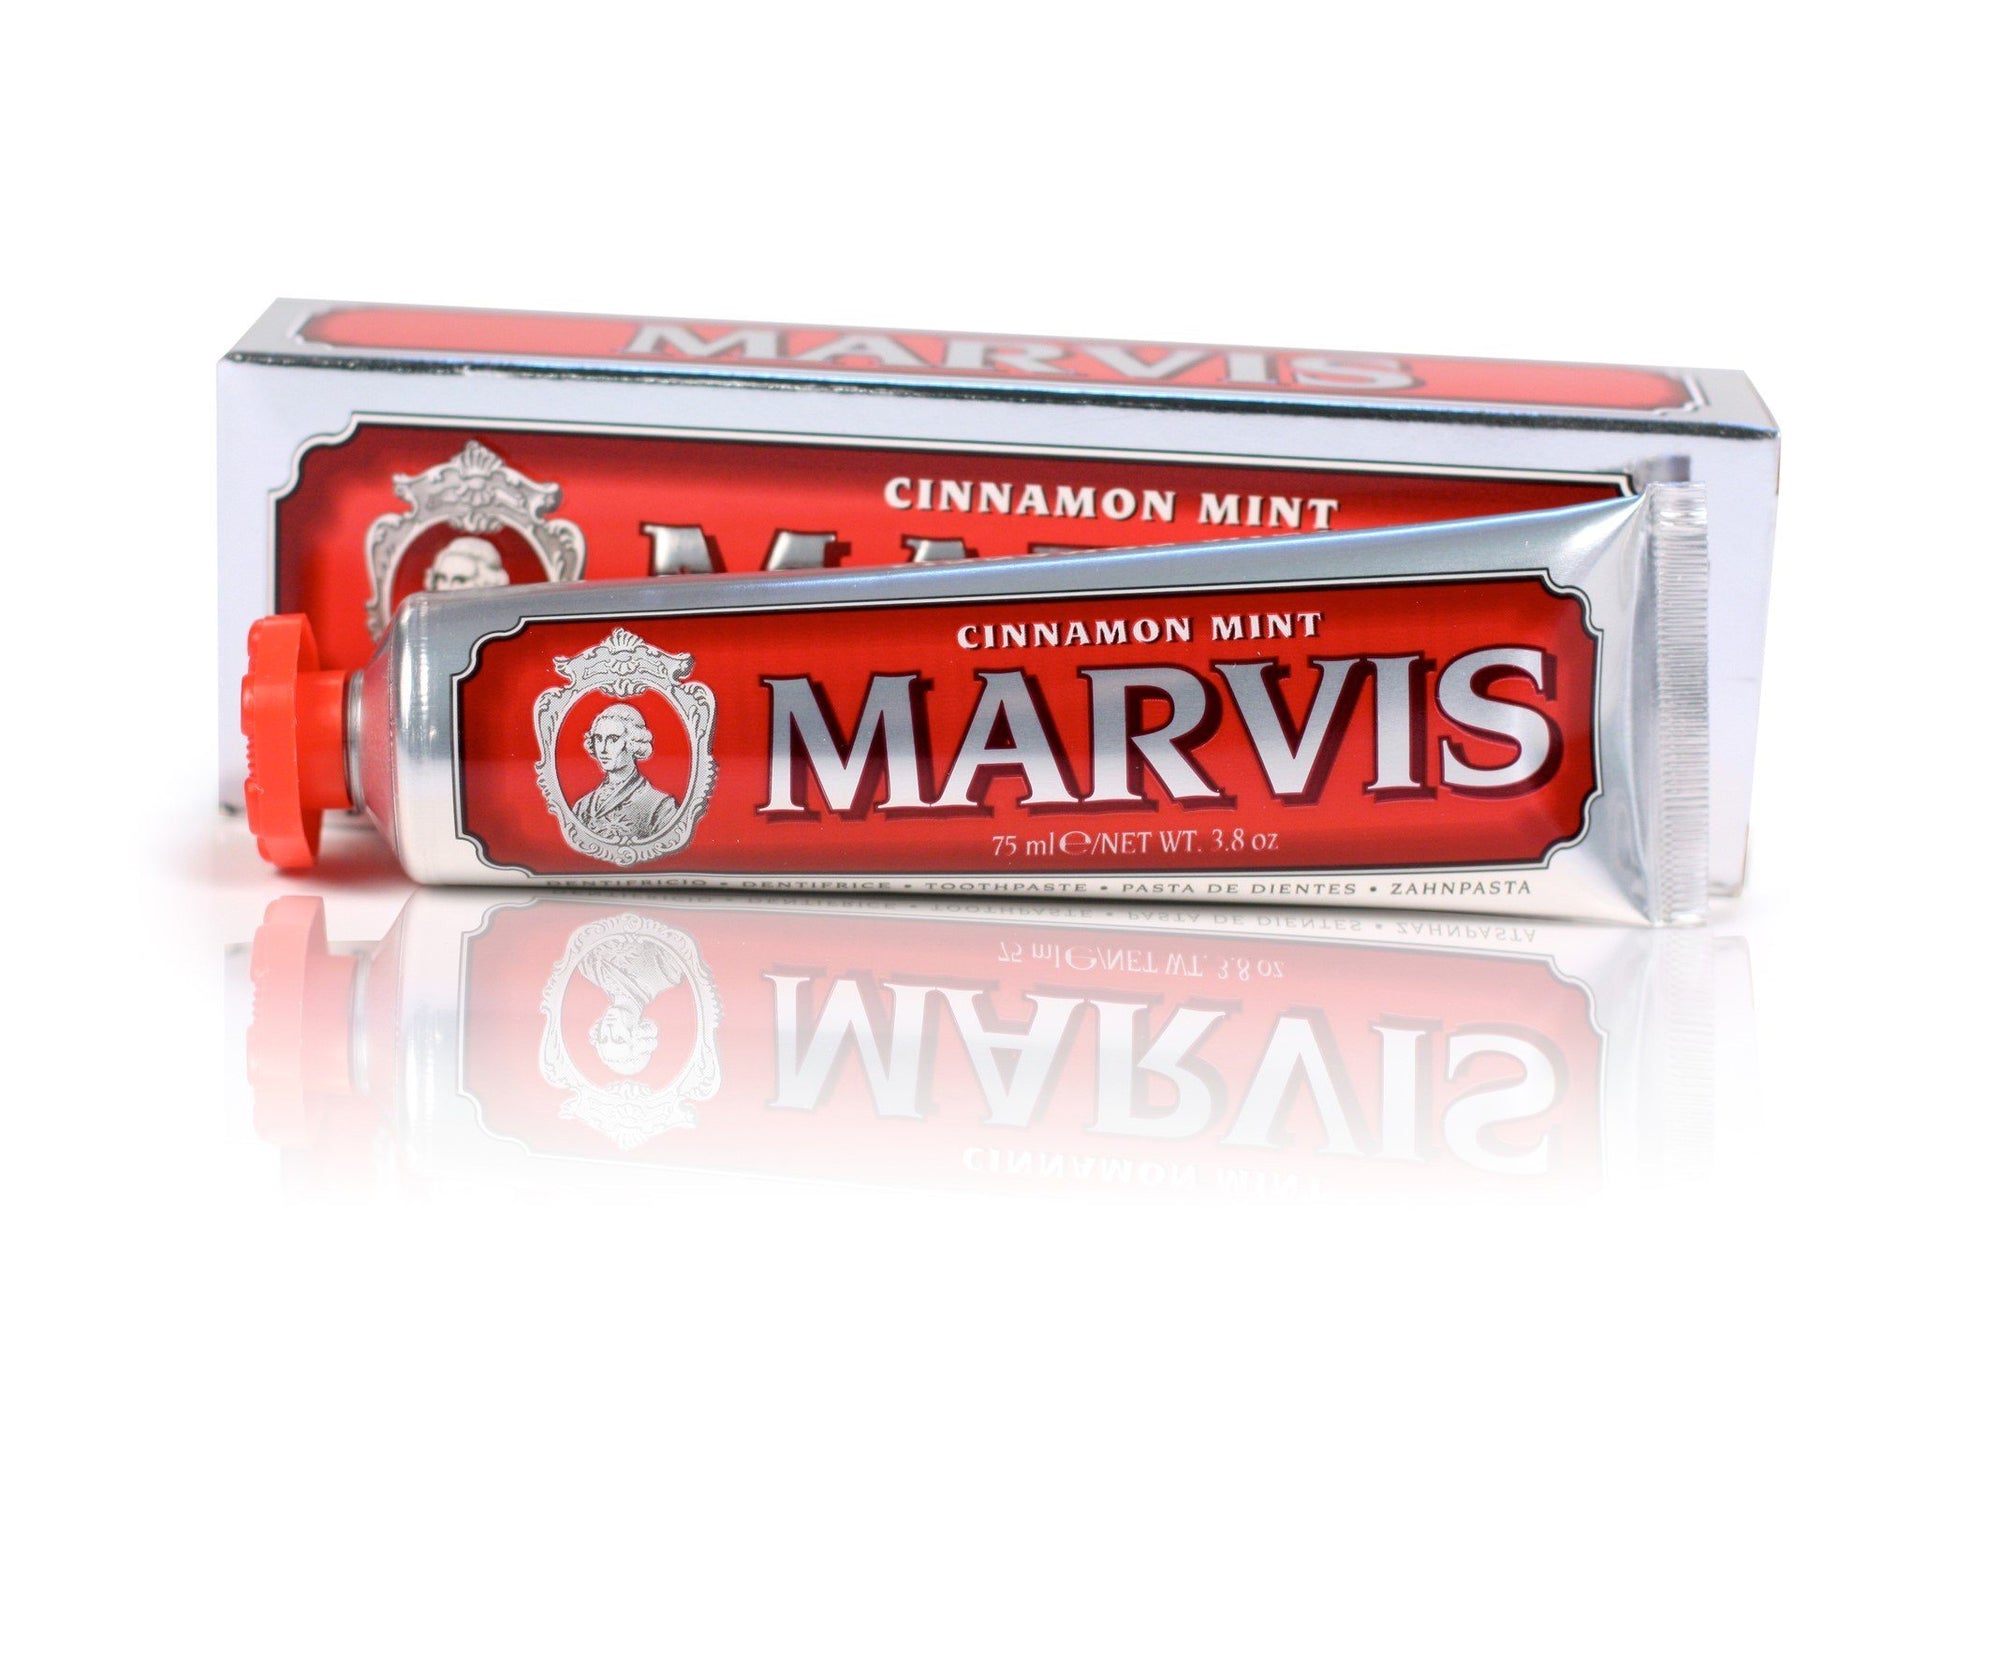 Marvis - Cinnamon Mint Toothpaste - Soap & Water Everyday